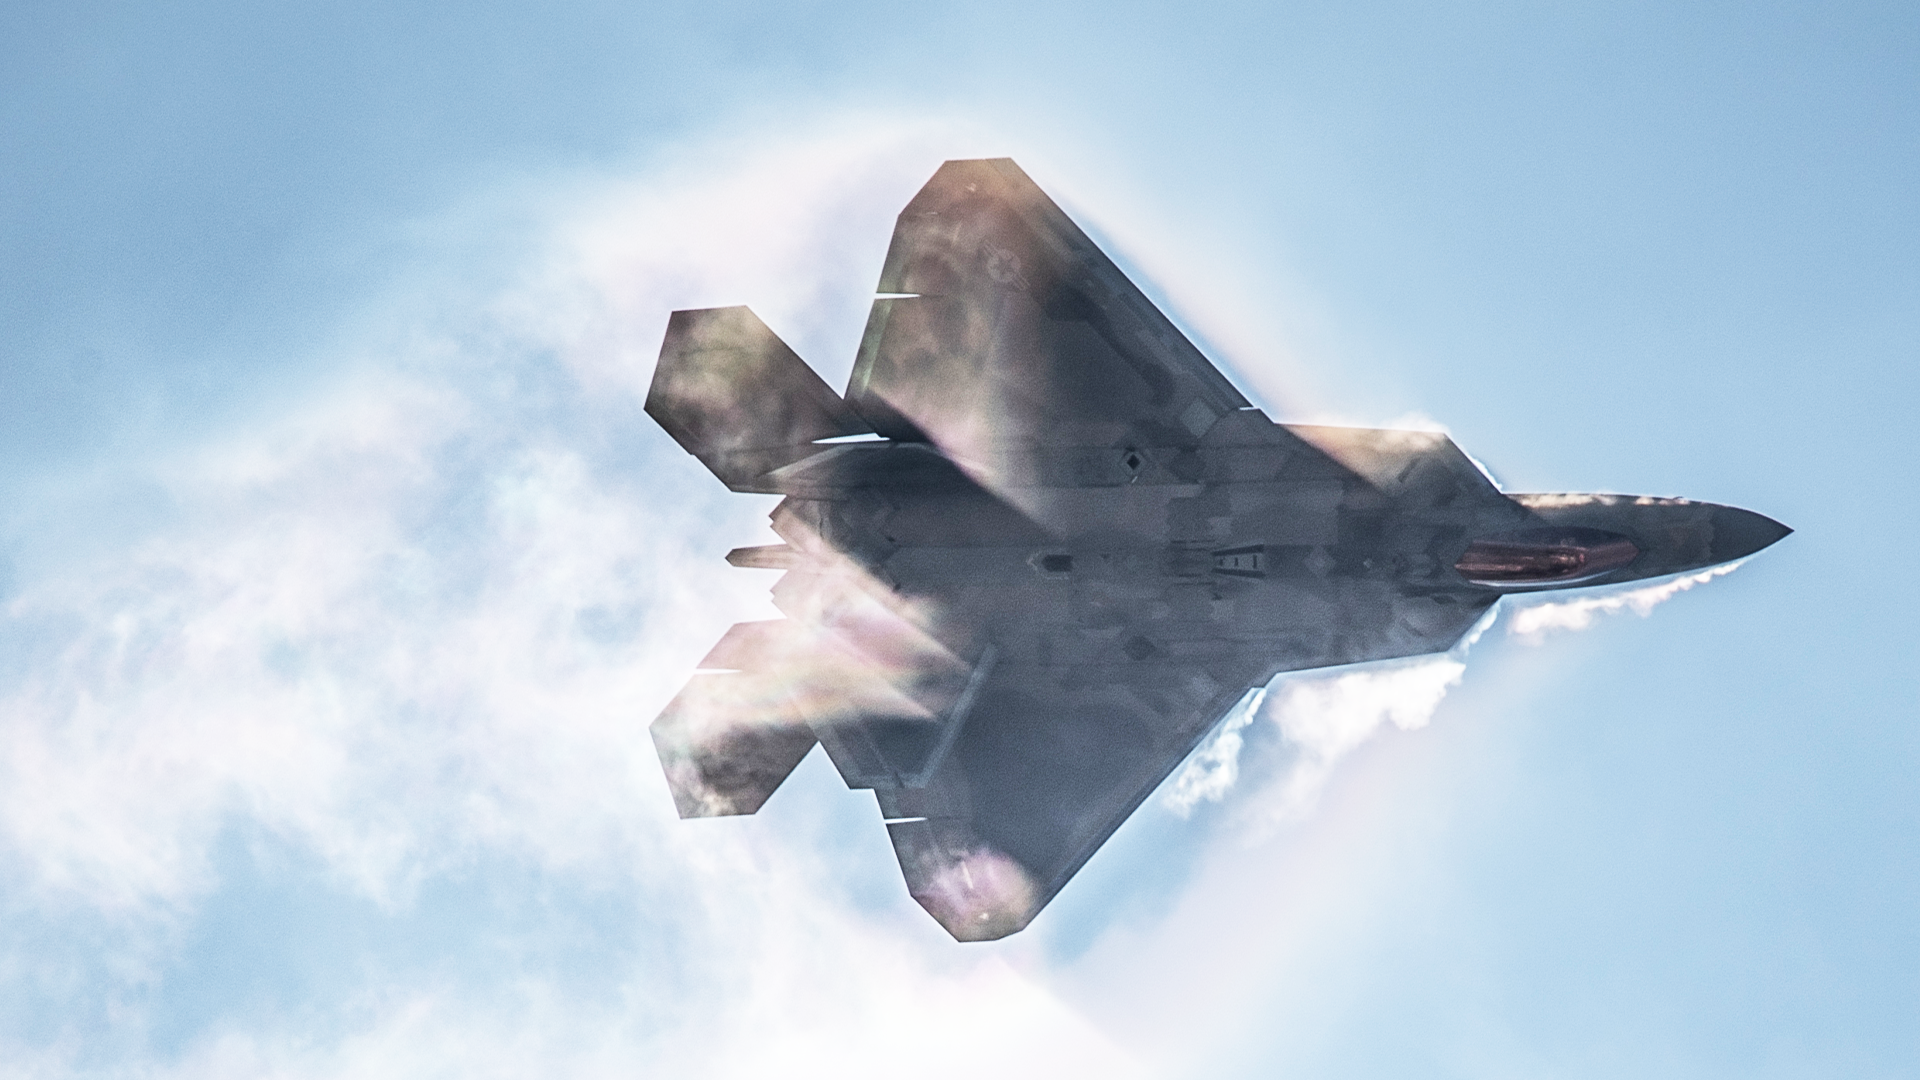 Air Force Pilots Explain Why The F-22 Raptor Is A 'Beast' In Aerial Combat